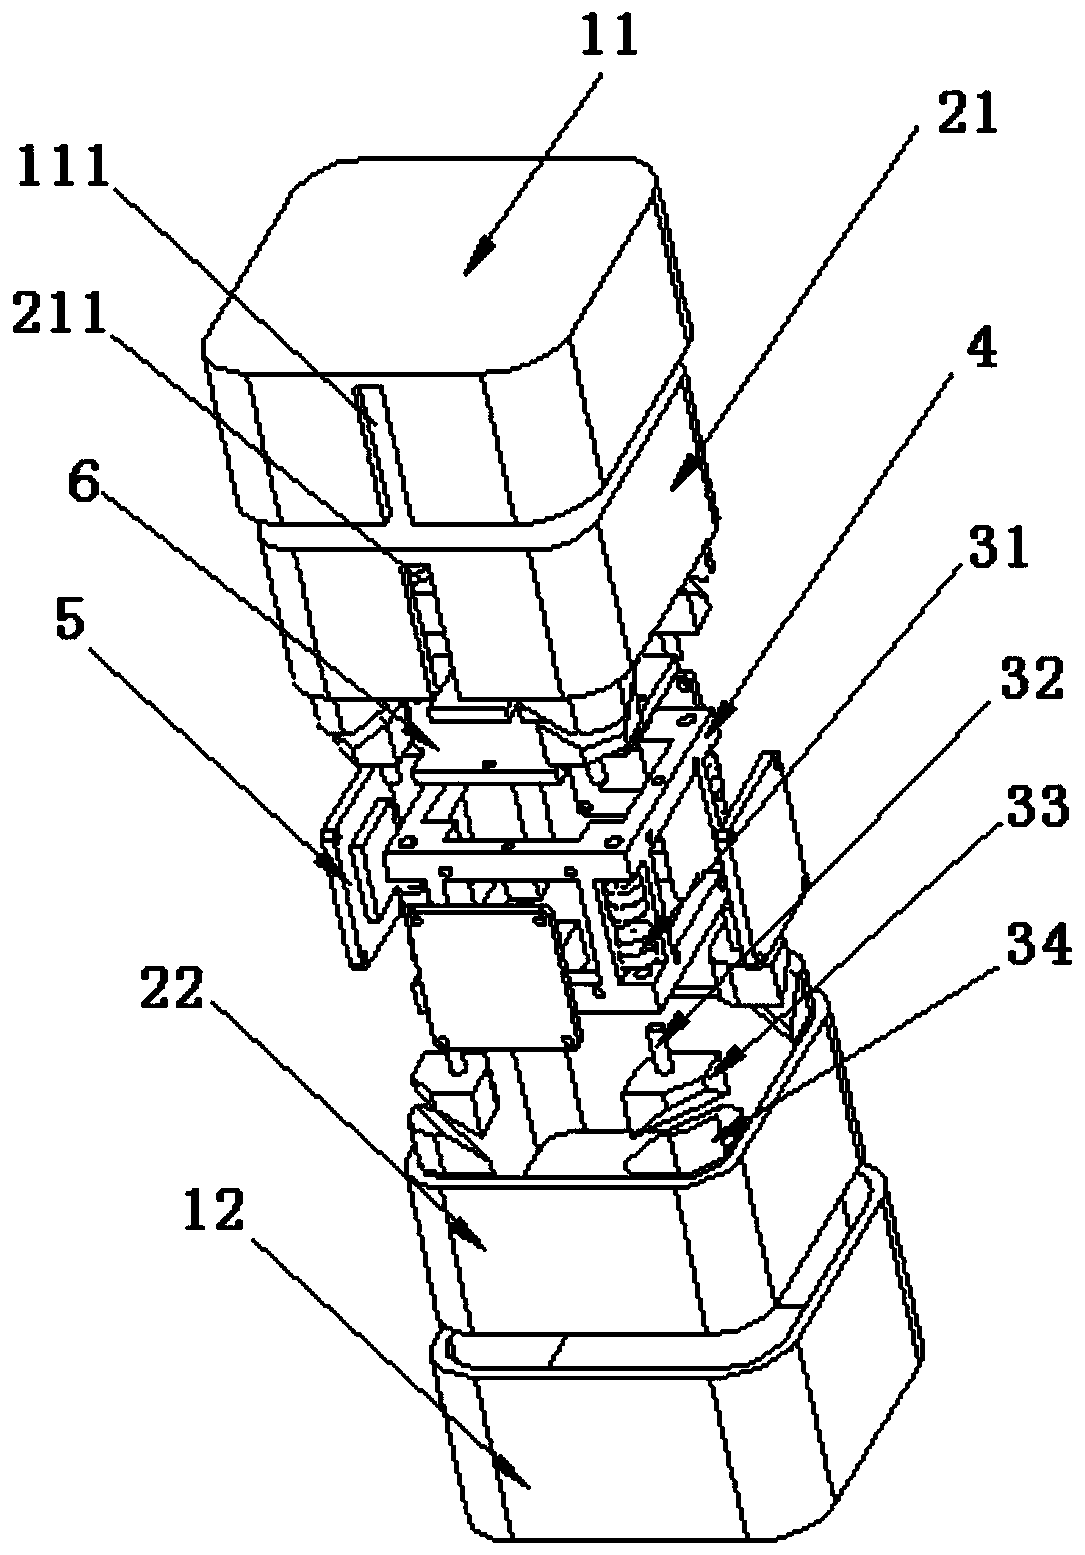 Anti-impact vibration reduction structure and vibration reduction system for micro-inertia measurement unit